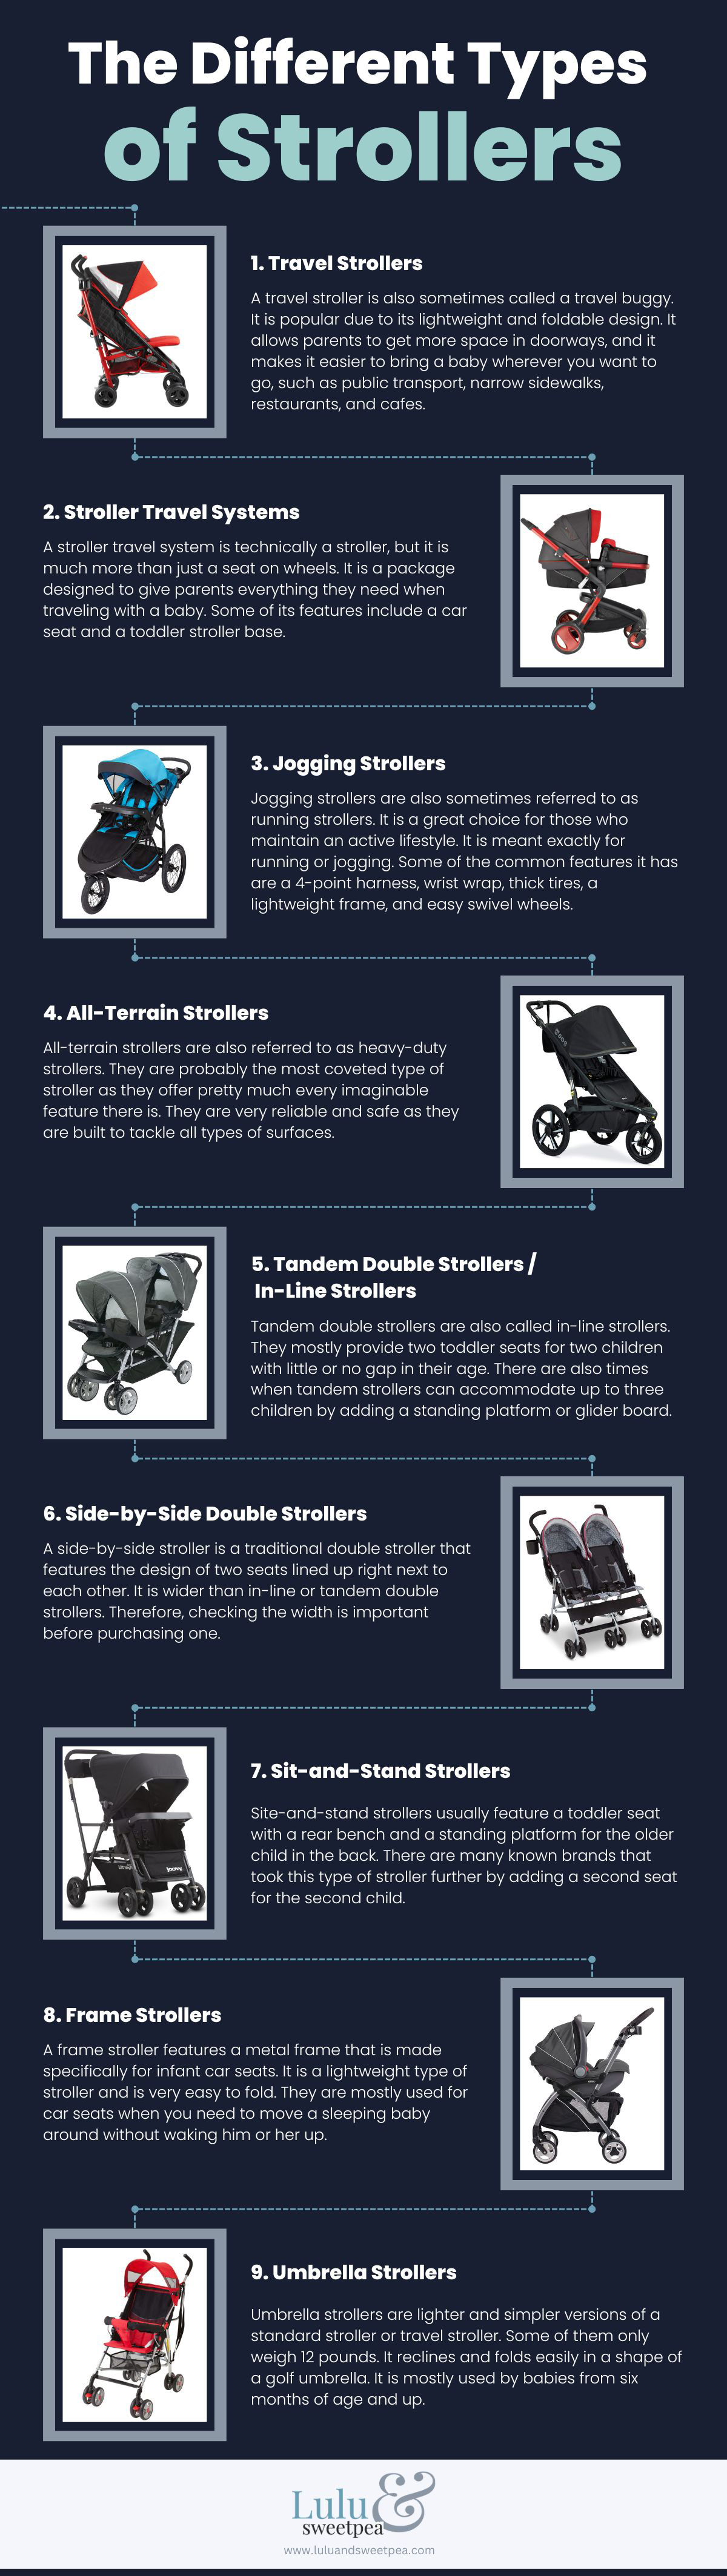 The Different Types of Strollers